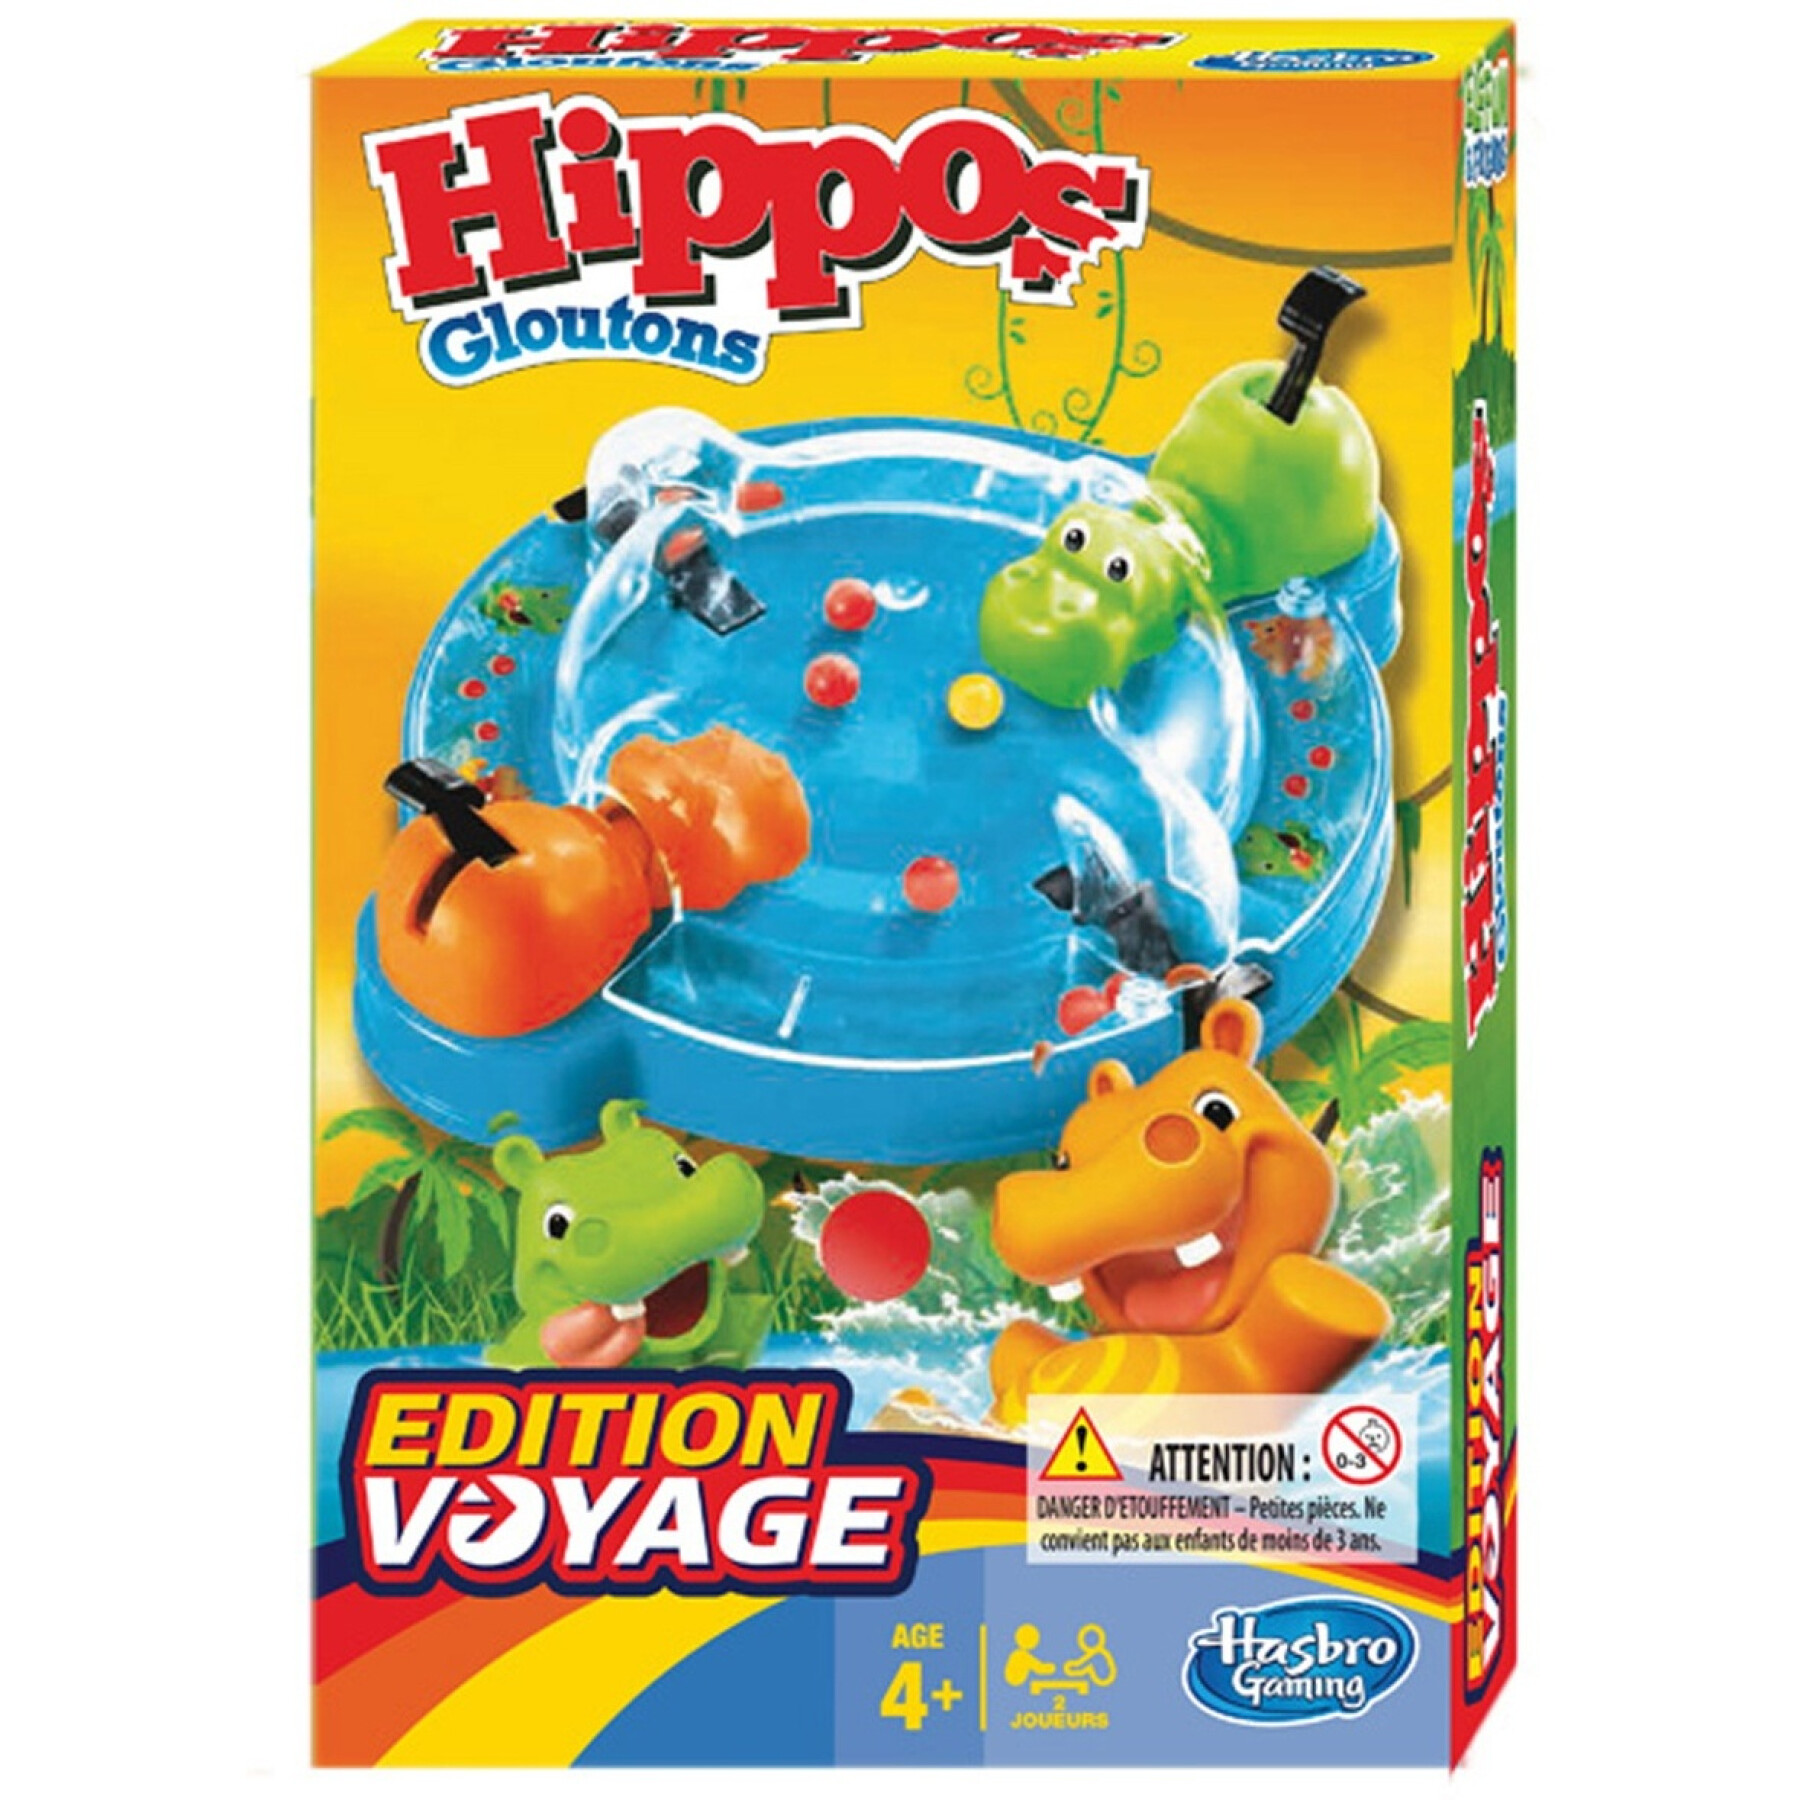 Board games hippos gloutons voyage Hasbro France France